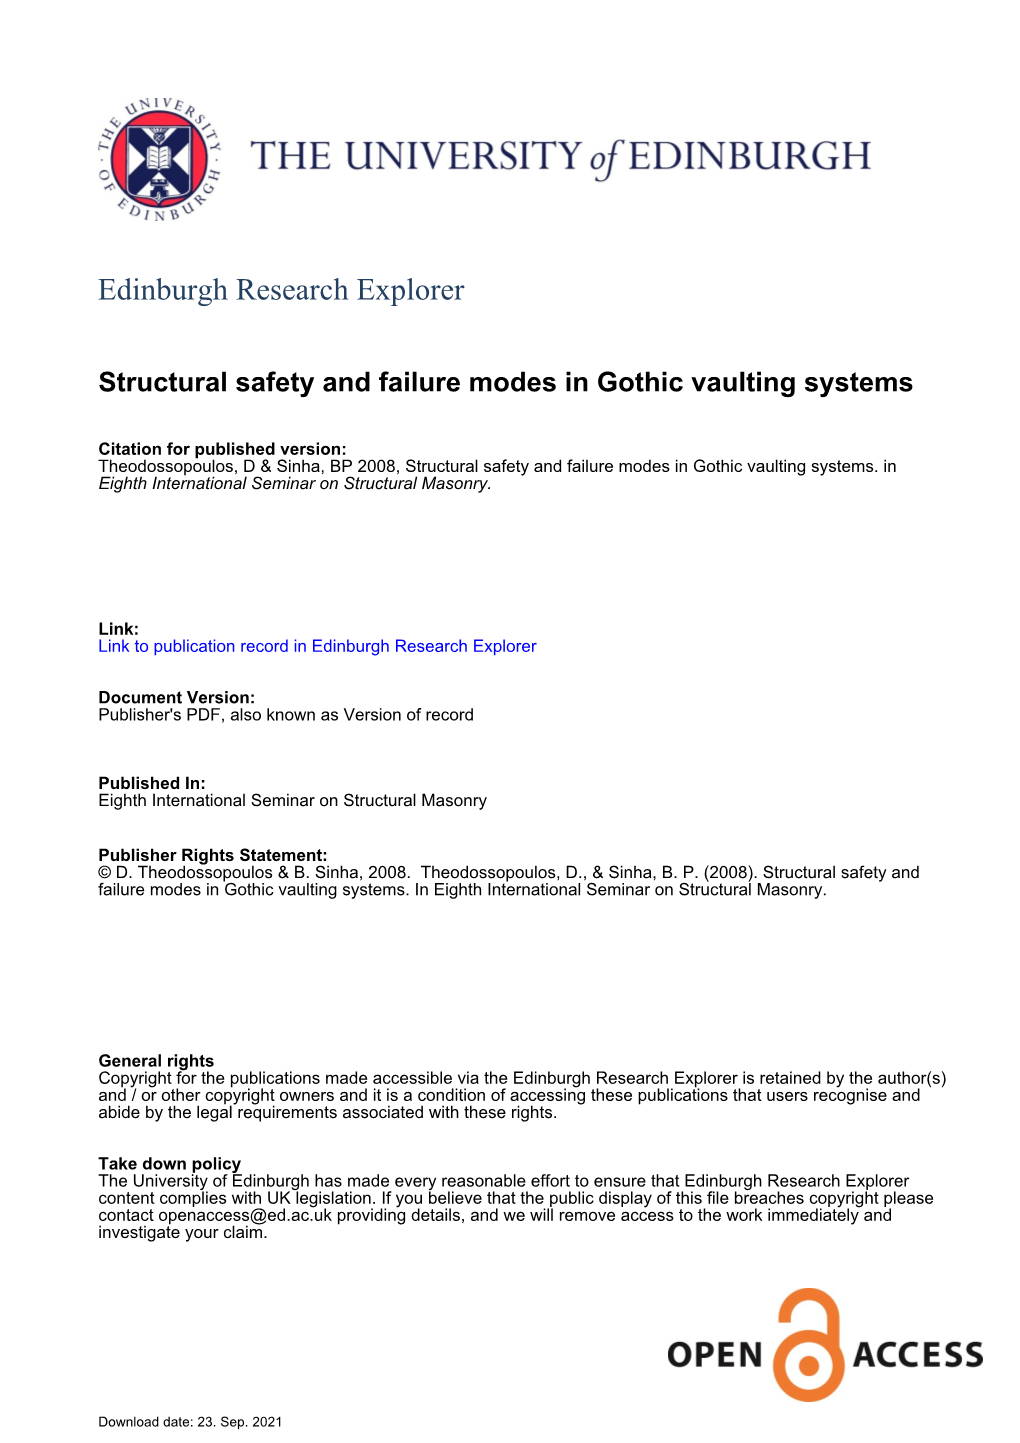 PDF. Structural Safety and Failure Modes in Gothic Vaulting Systems